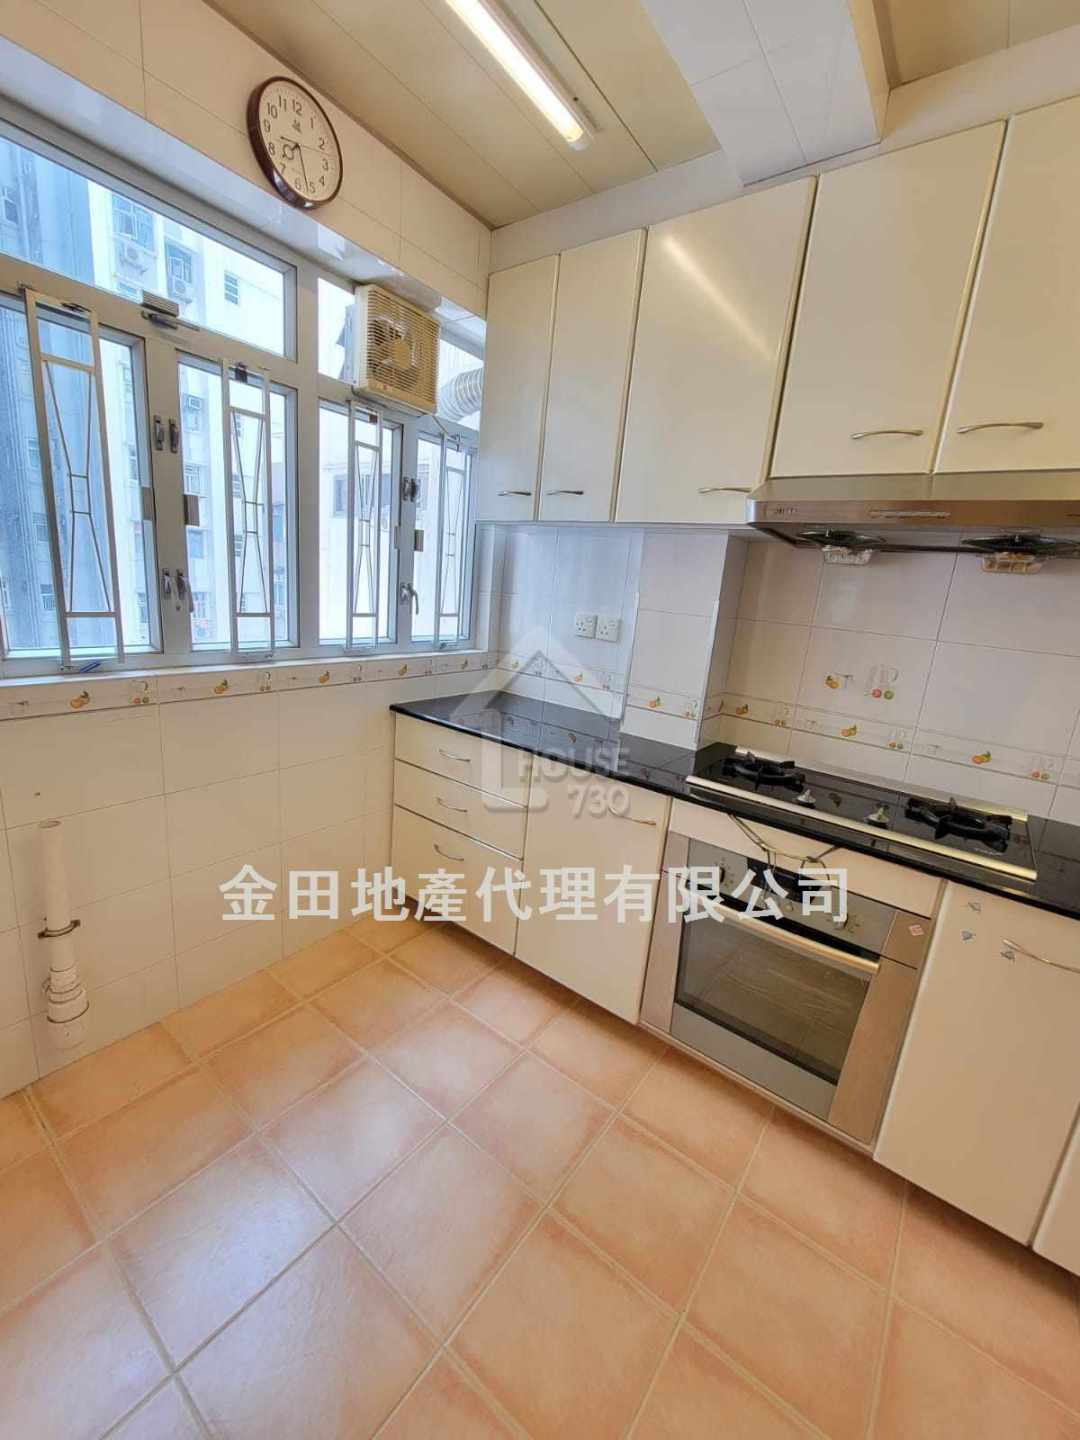 Wan Chai KWONG SANG HONG BUILDING Middle Floor Kitchen House730-6282601